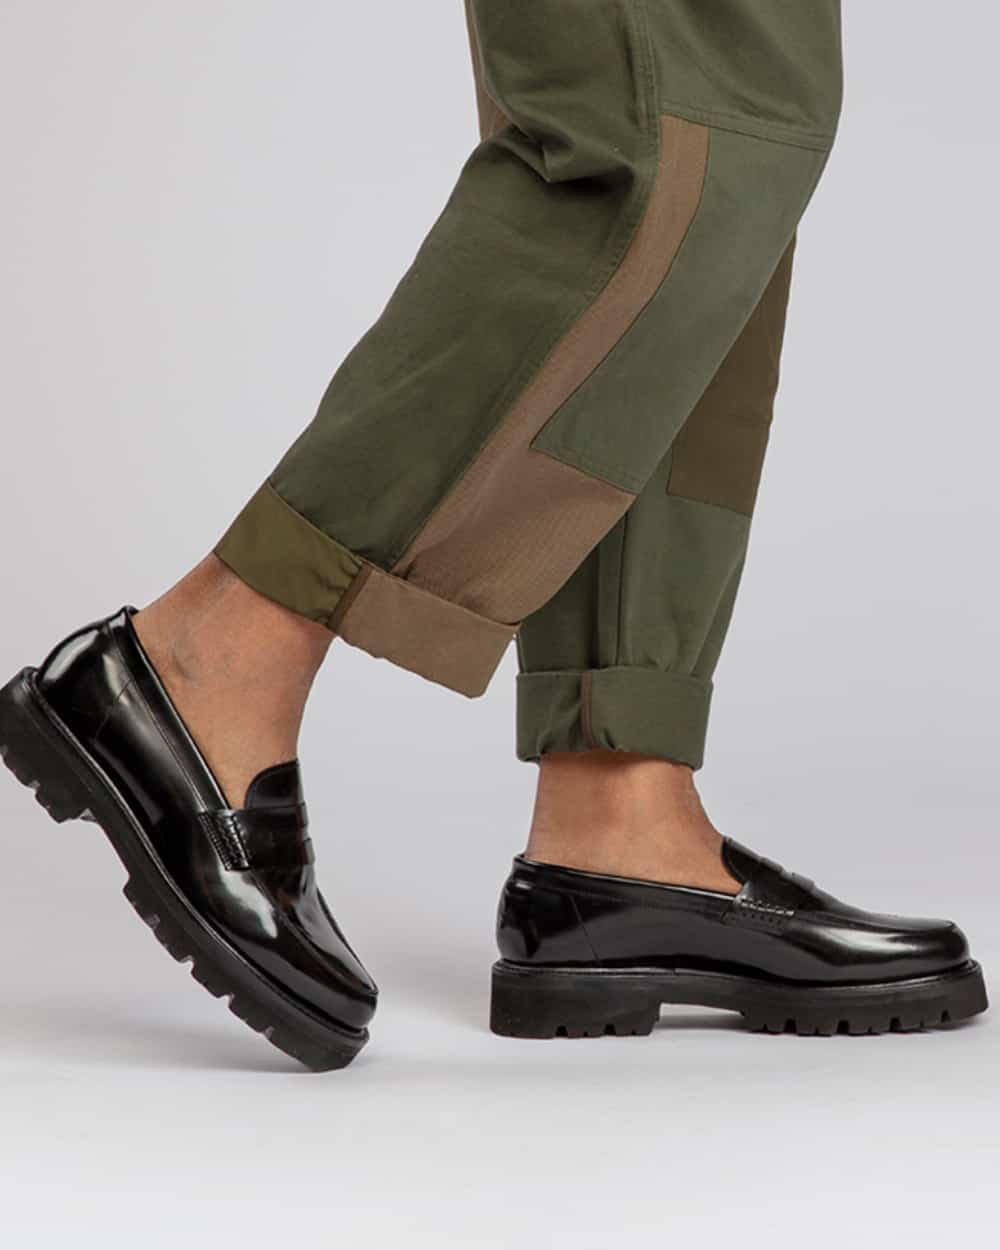 Man wearing chunky sole black leather Grenson loafers sockless with army green pants 